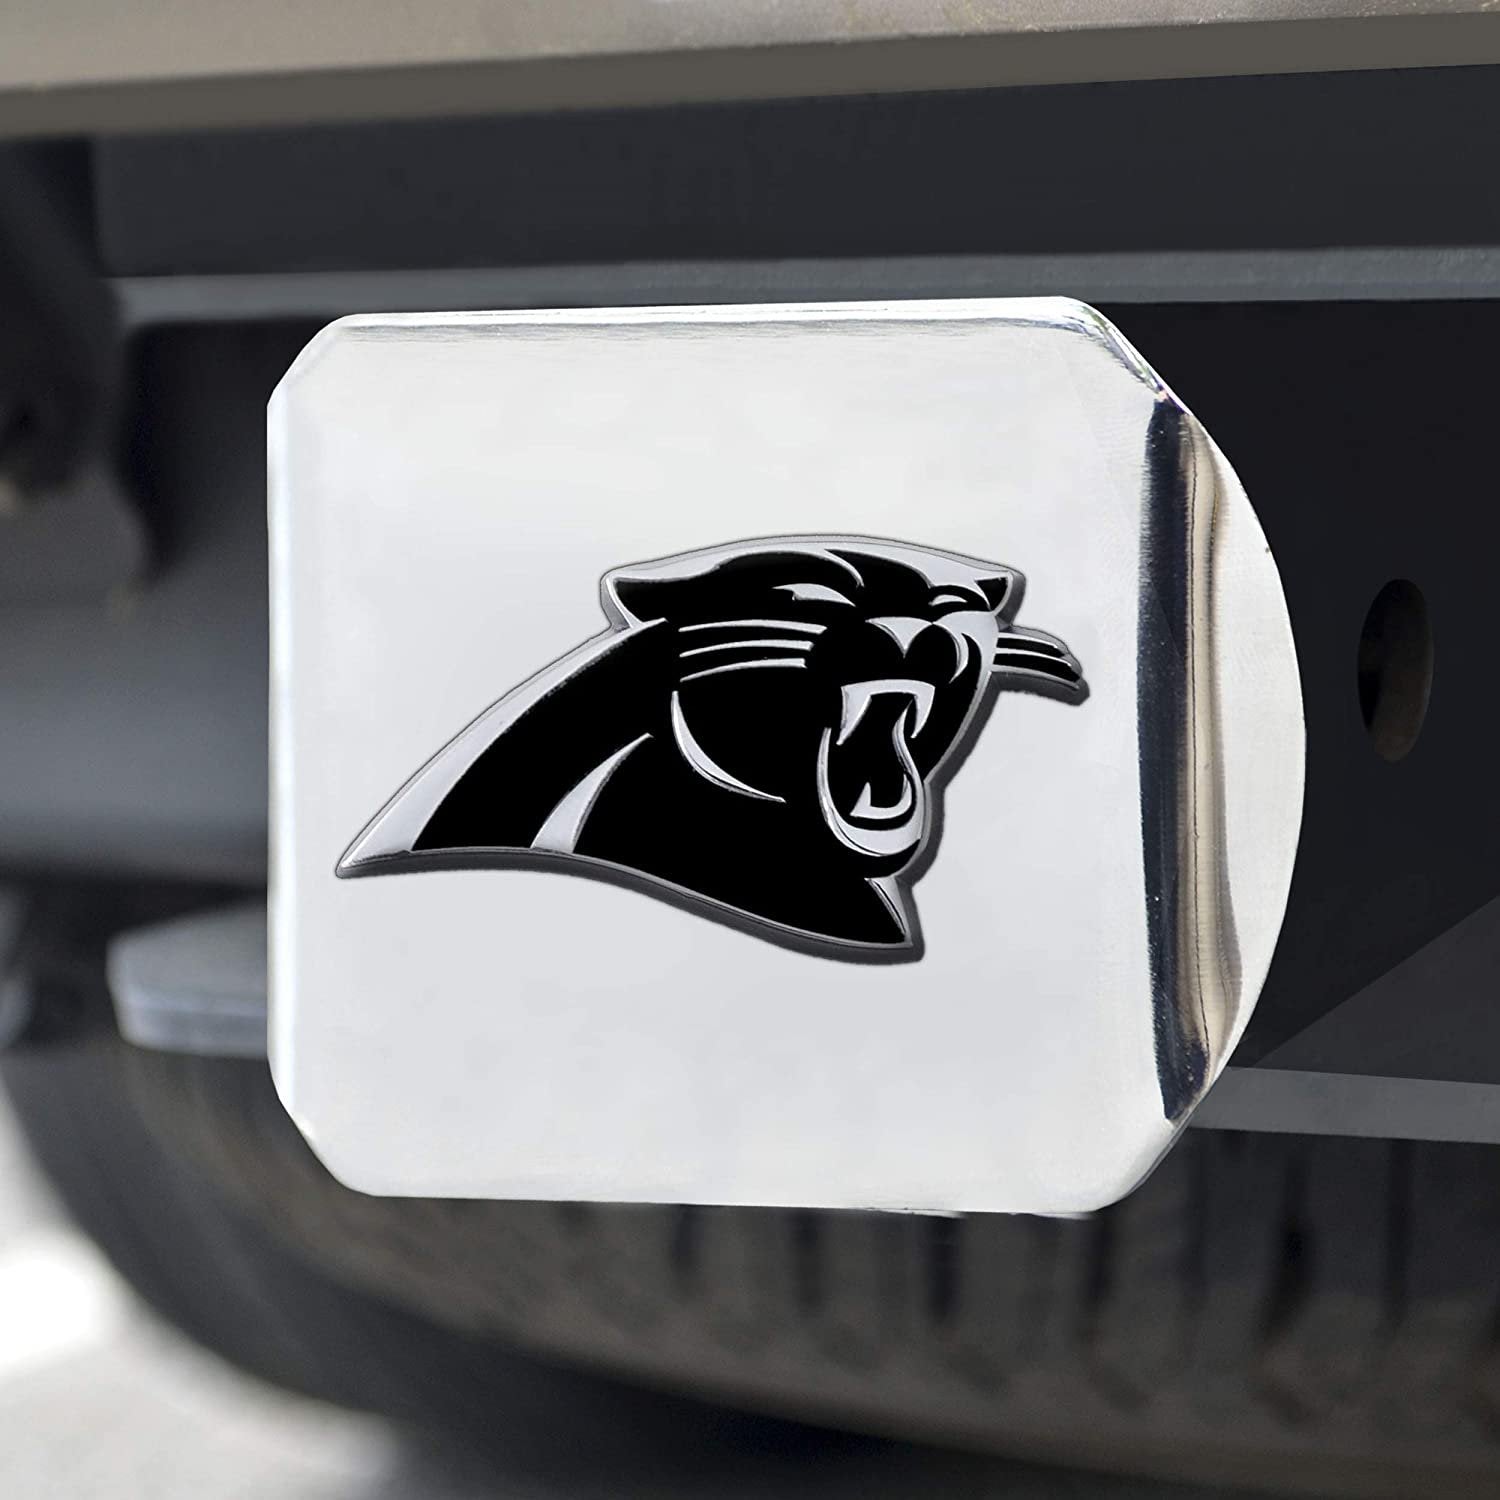 Carolina Panthers Hitch Cover Solid Metal with Raised Chrome Metal Emblem 2" Square Type III